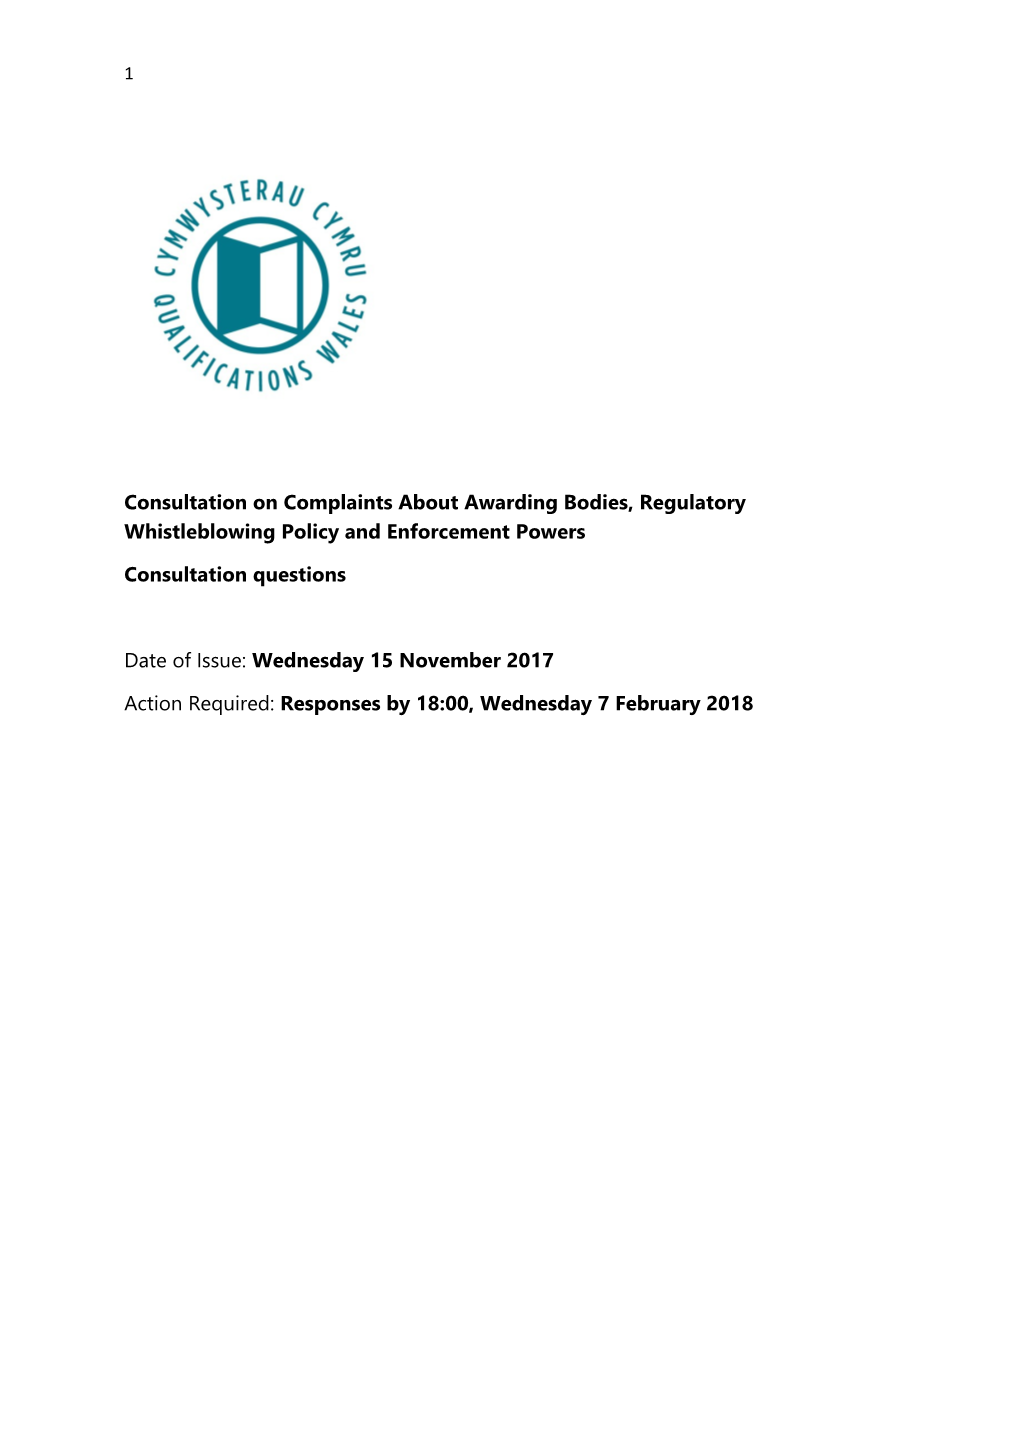 Consultation on Complaints About Awarding Bodies, Regulatory Whistleblowing Policy And